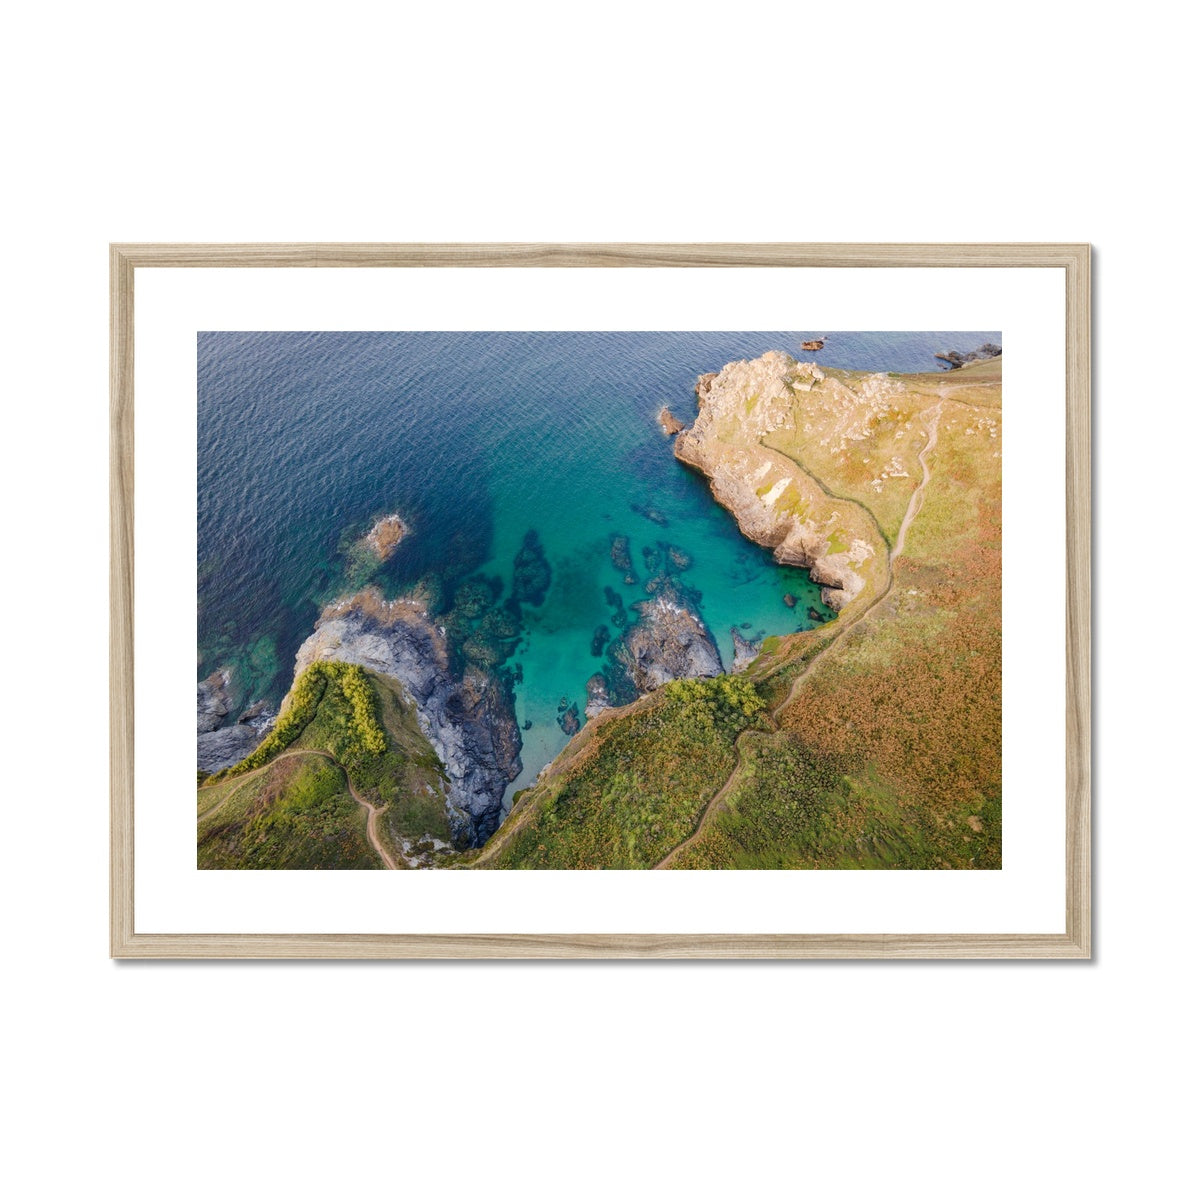 piskies cove wooden frame